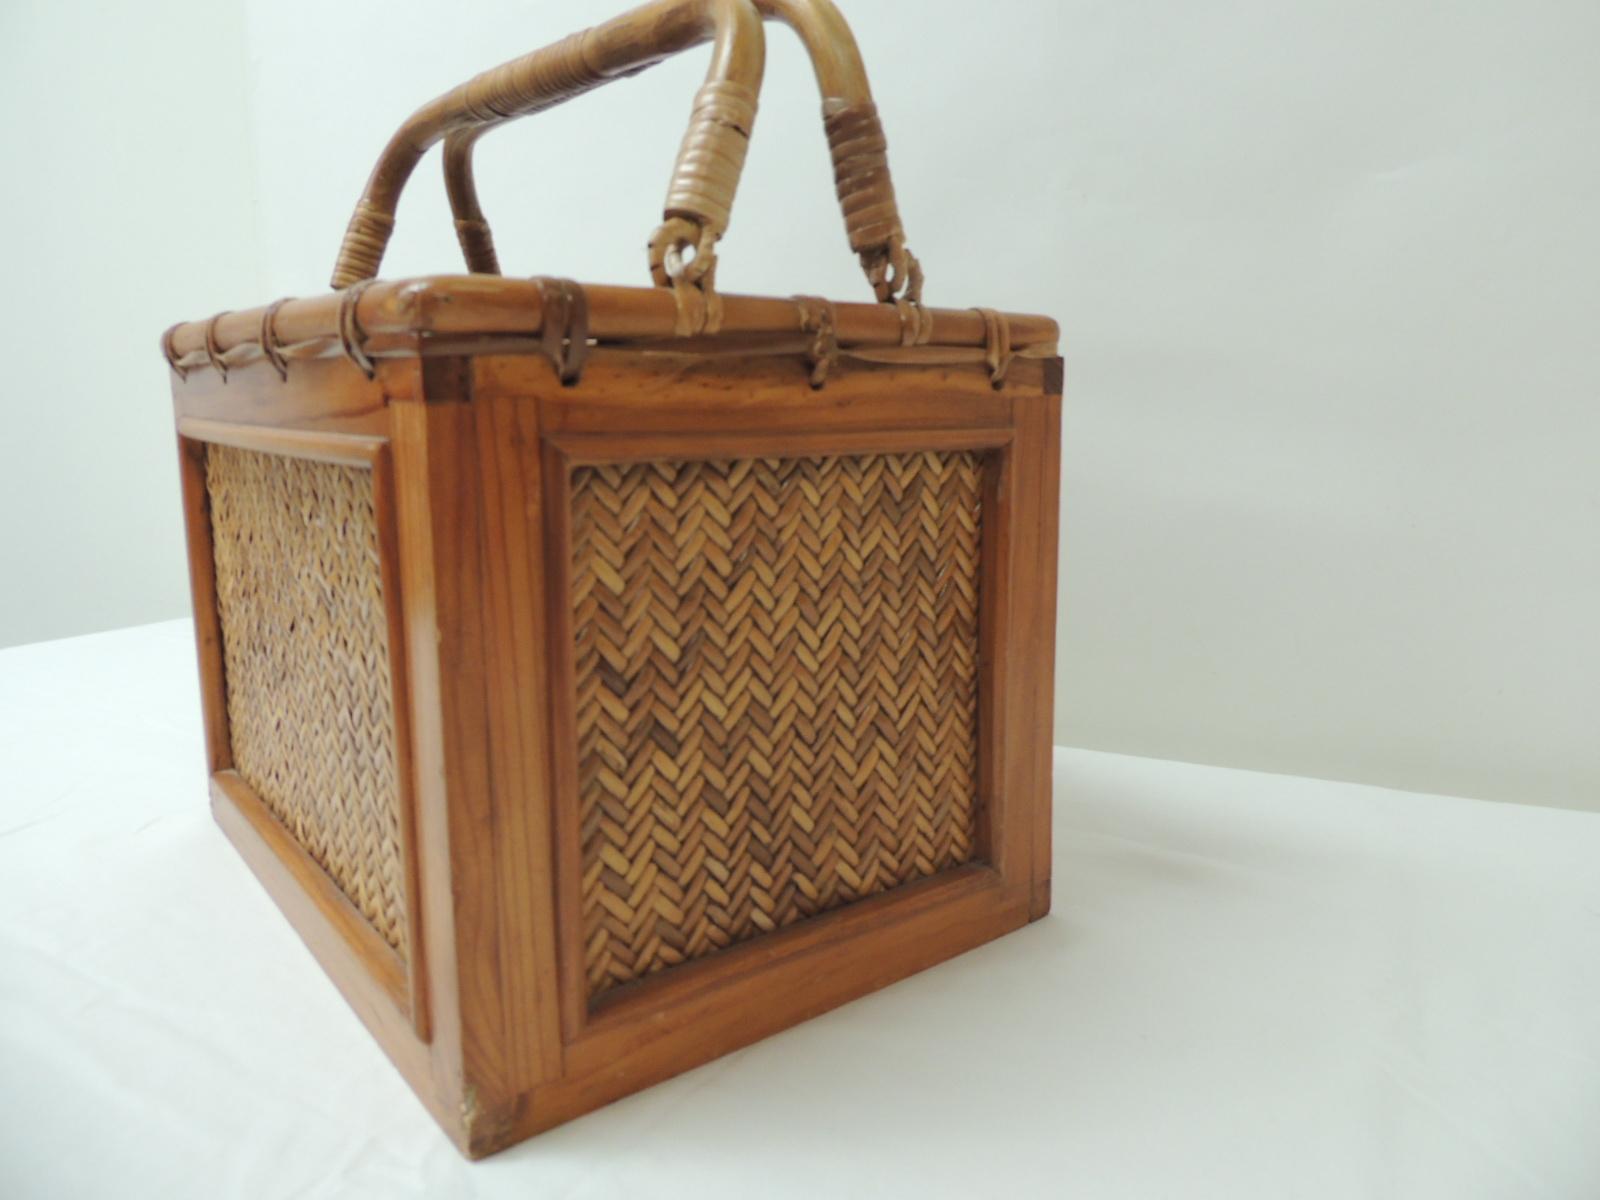 Wooden bamboo handle and wicker panels magazine rack/holder or basket.
Size: 13 W x 10 D x 13.5 H.